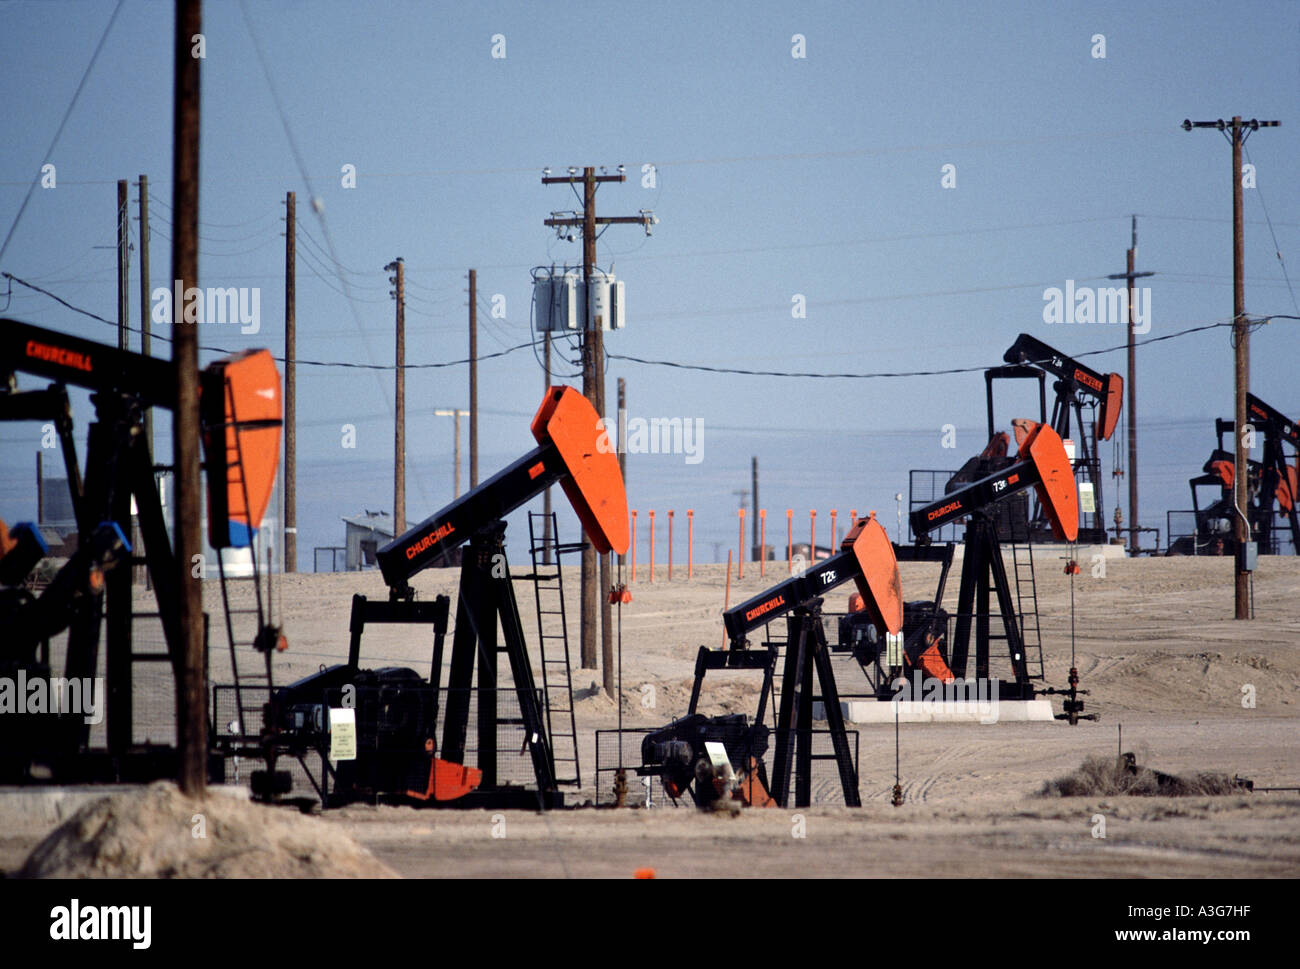 Configuration of  7 orange and black oil extrusion pumps vigorously operating in the parched desert under multiple power lines Stock Photo